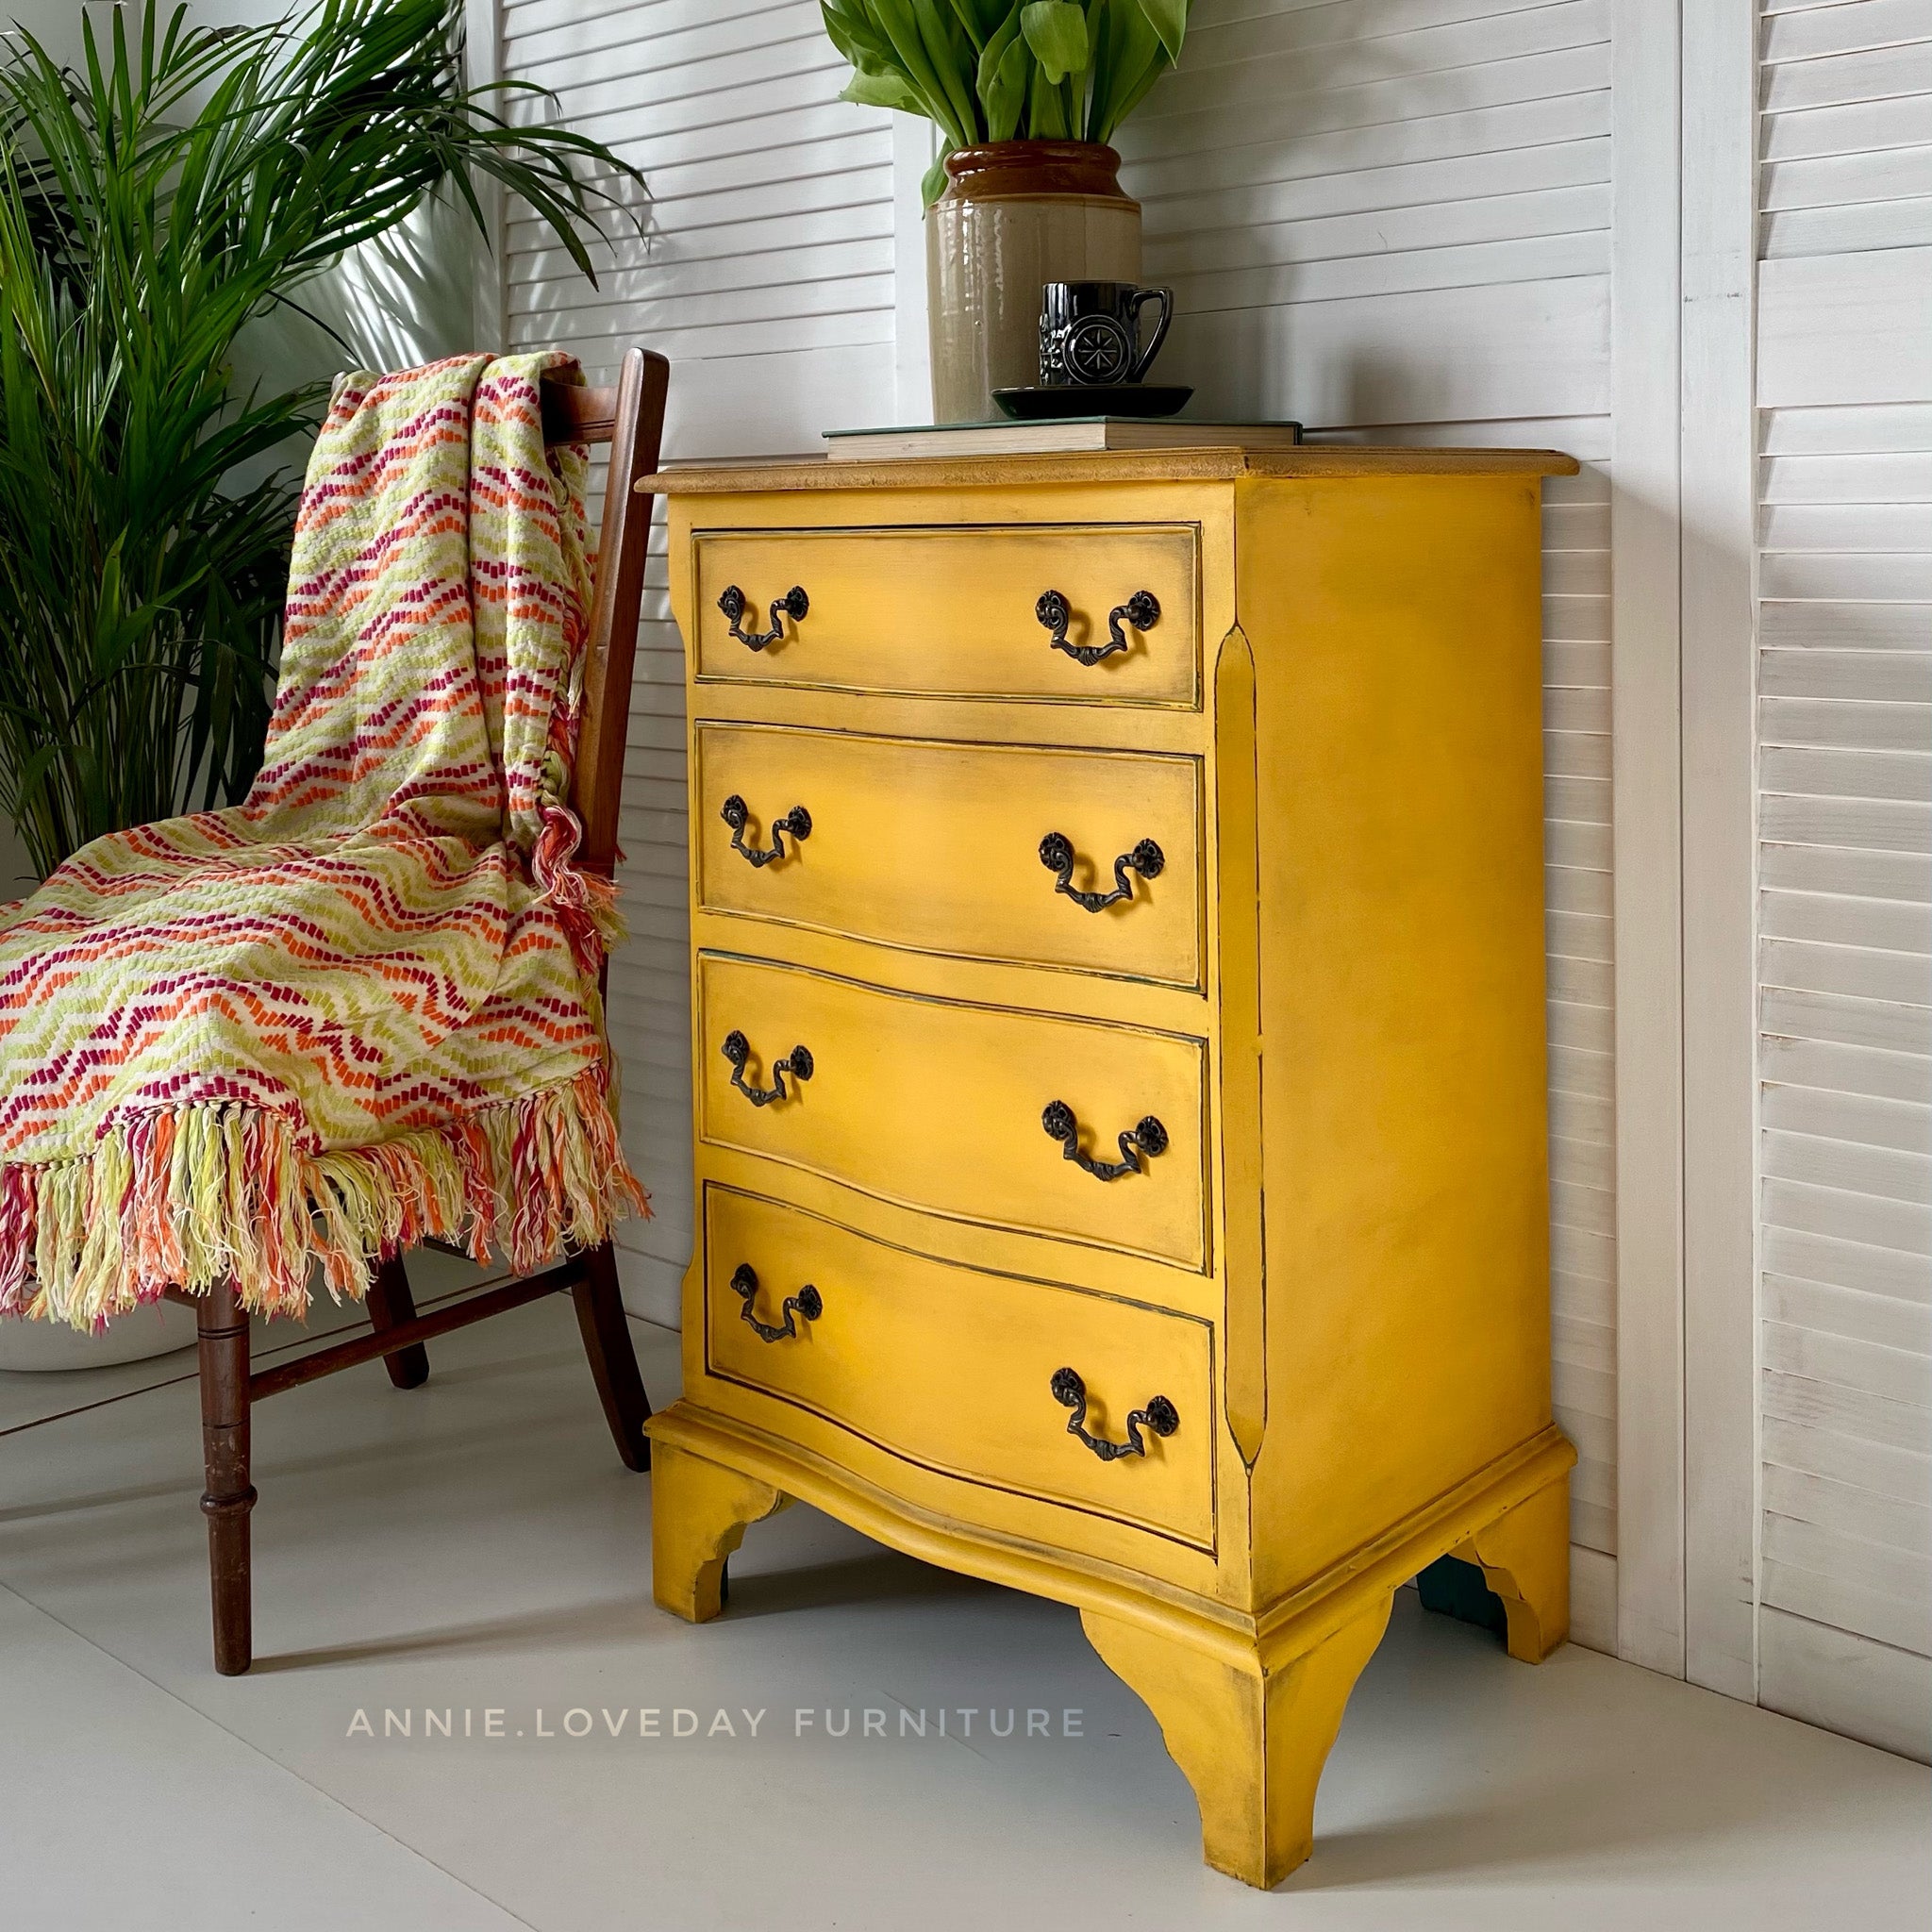 A vintage 4-drawer chest dresser refurbished by Annie Loveday Furniture is painted in Dixie Belle's Colonel Mustard chalk mineral paint.